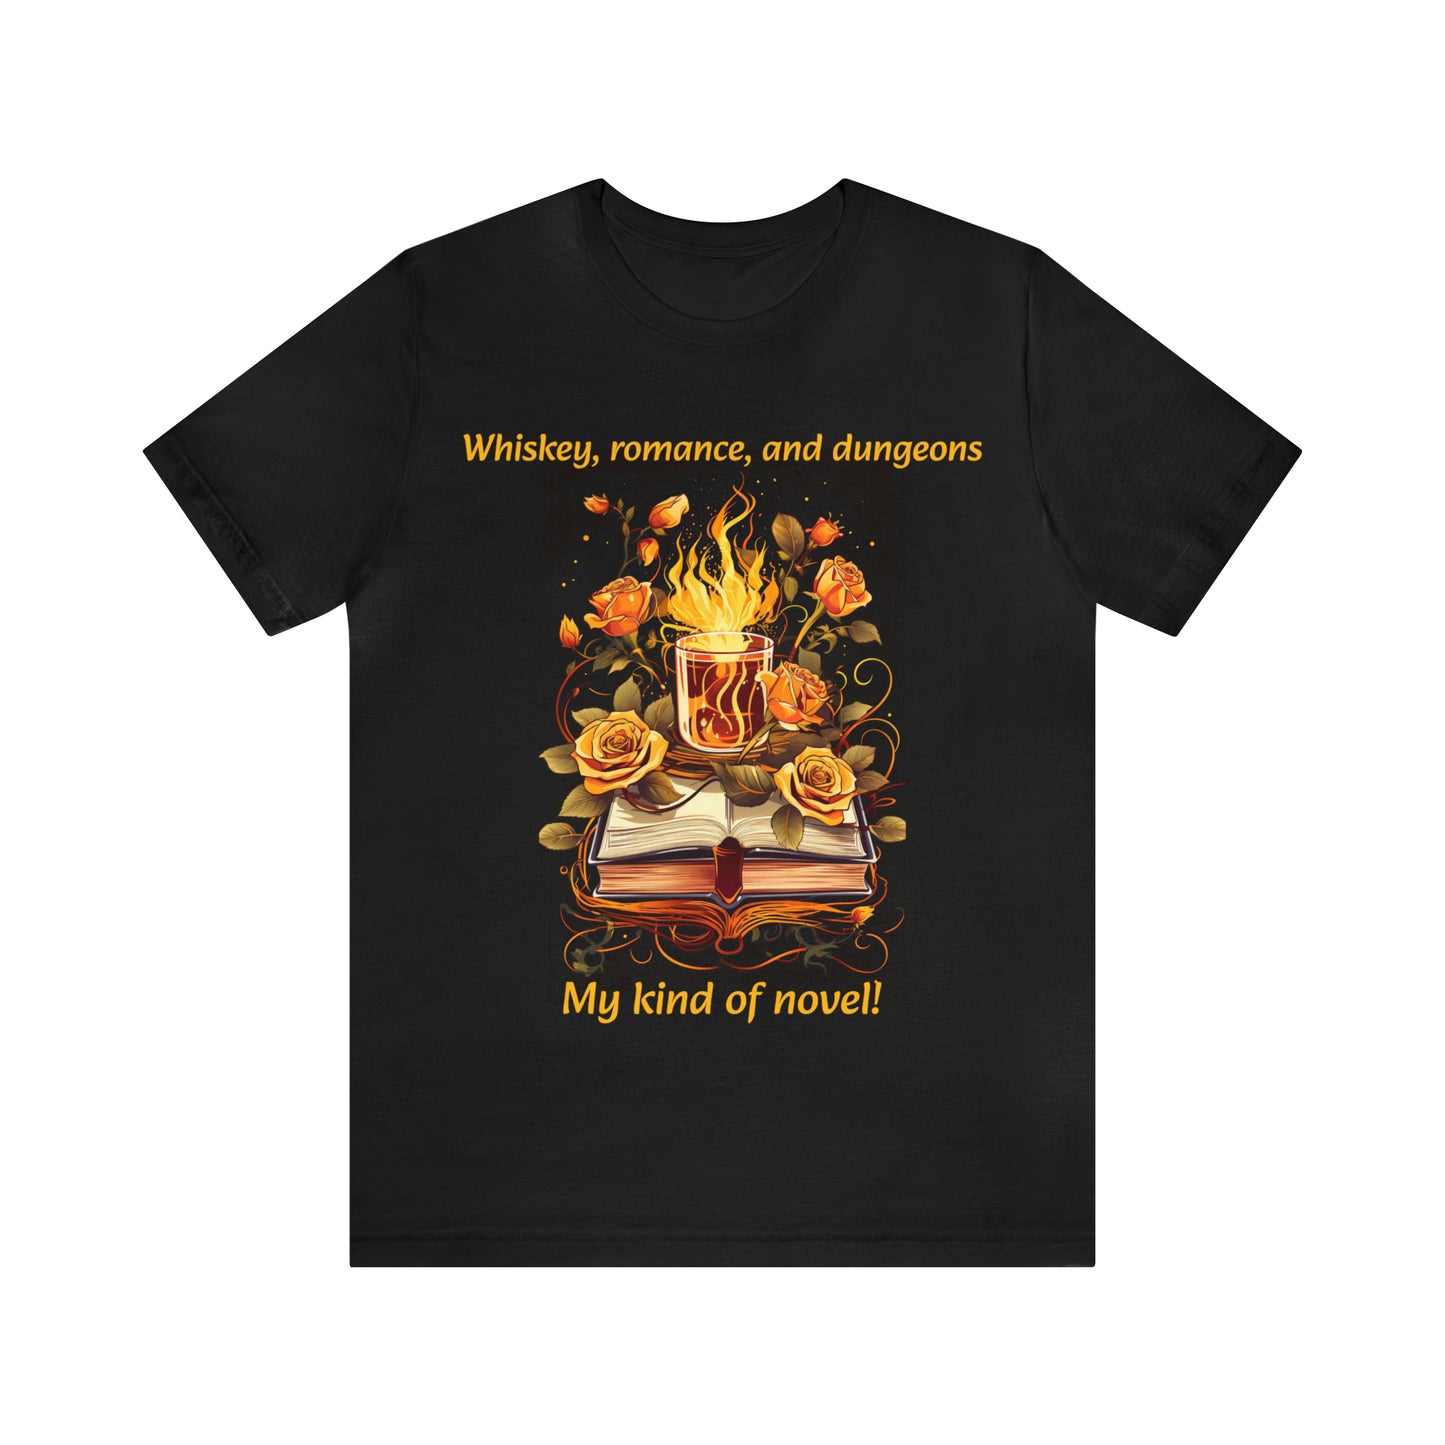 Whiskey, romance, and dungeons T-Shirt